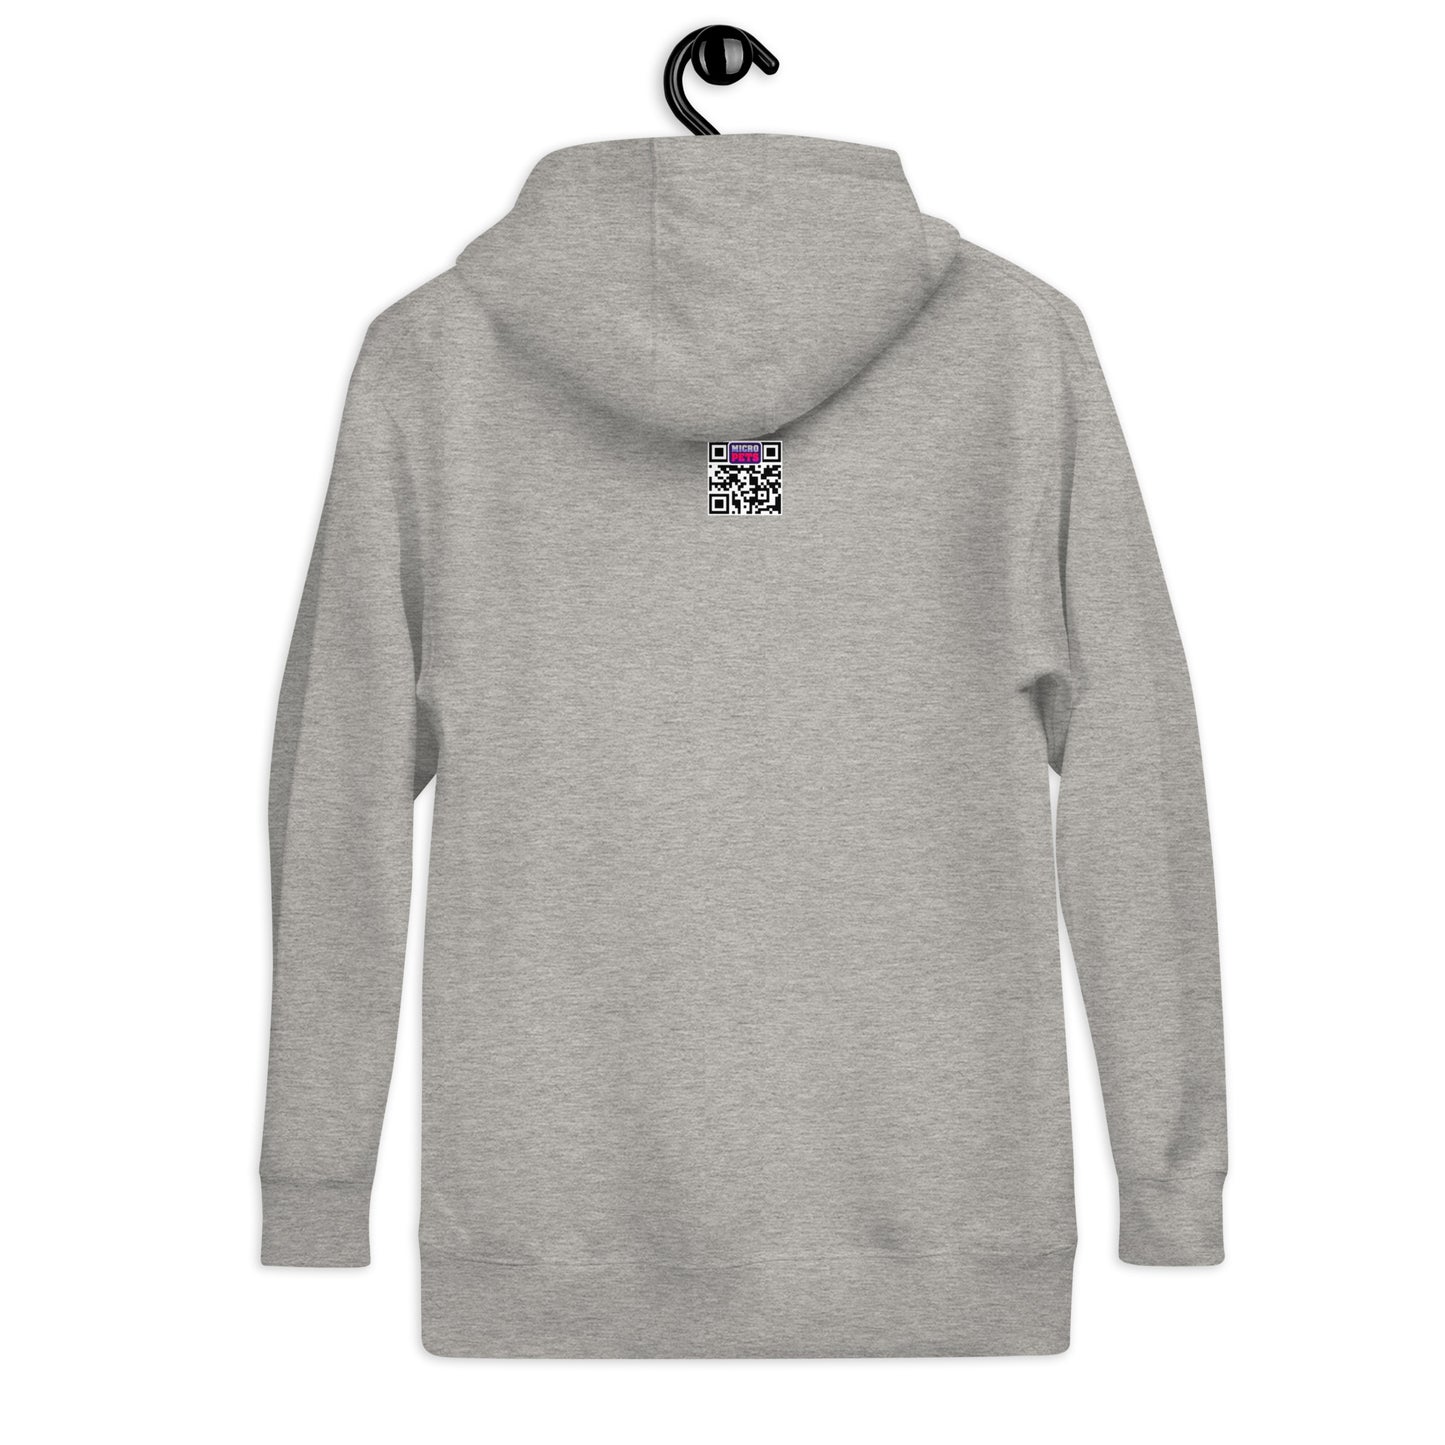 Micropets Embroidered Logo Unisex Hoodie